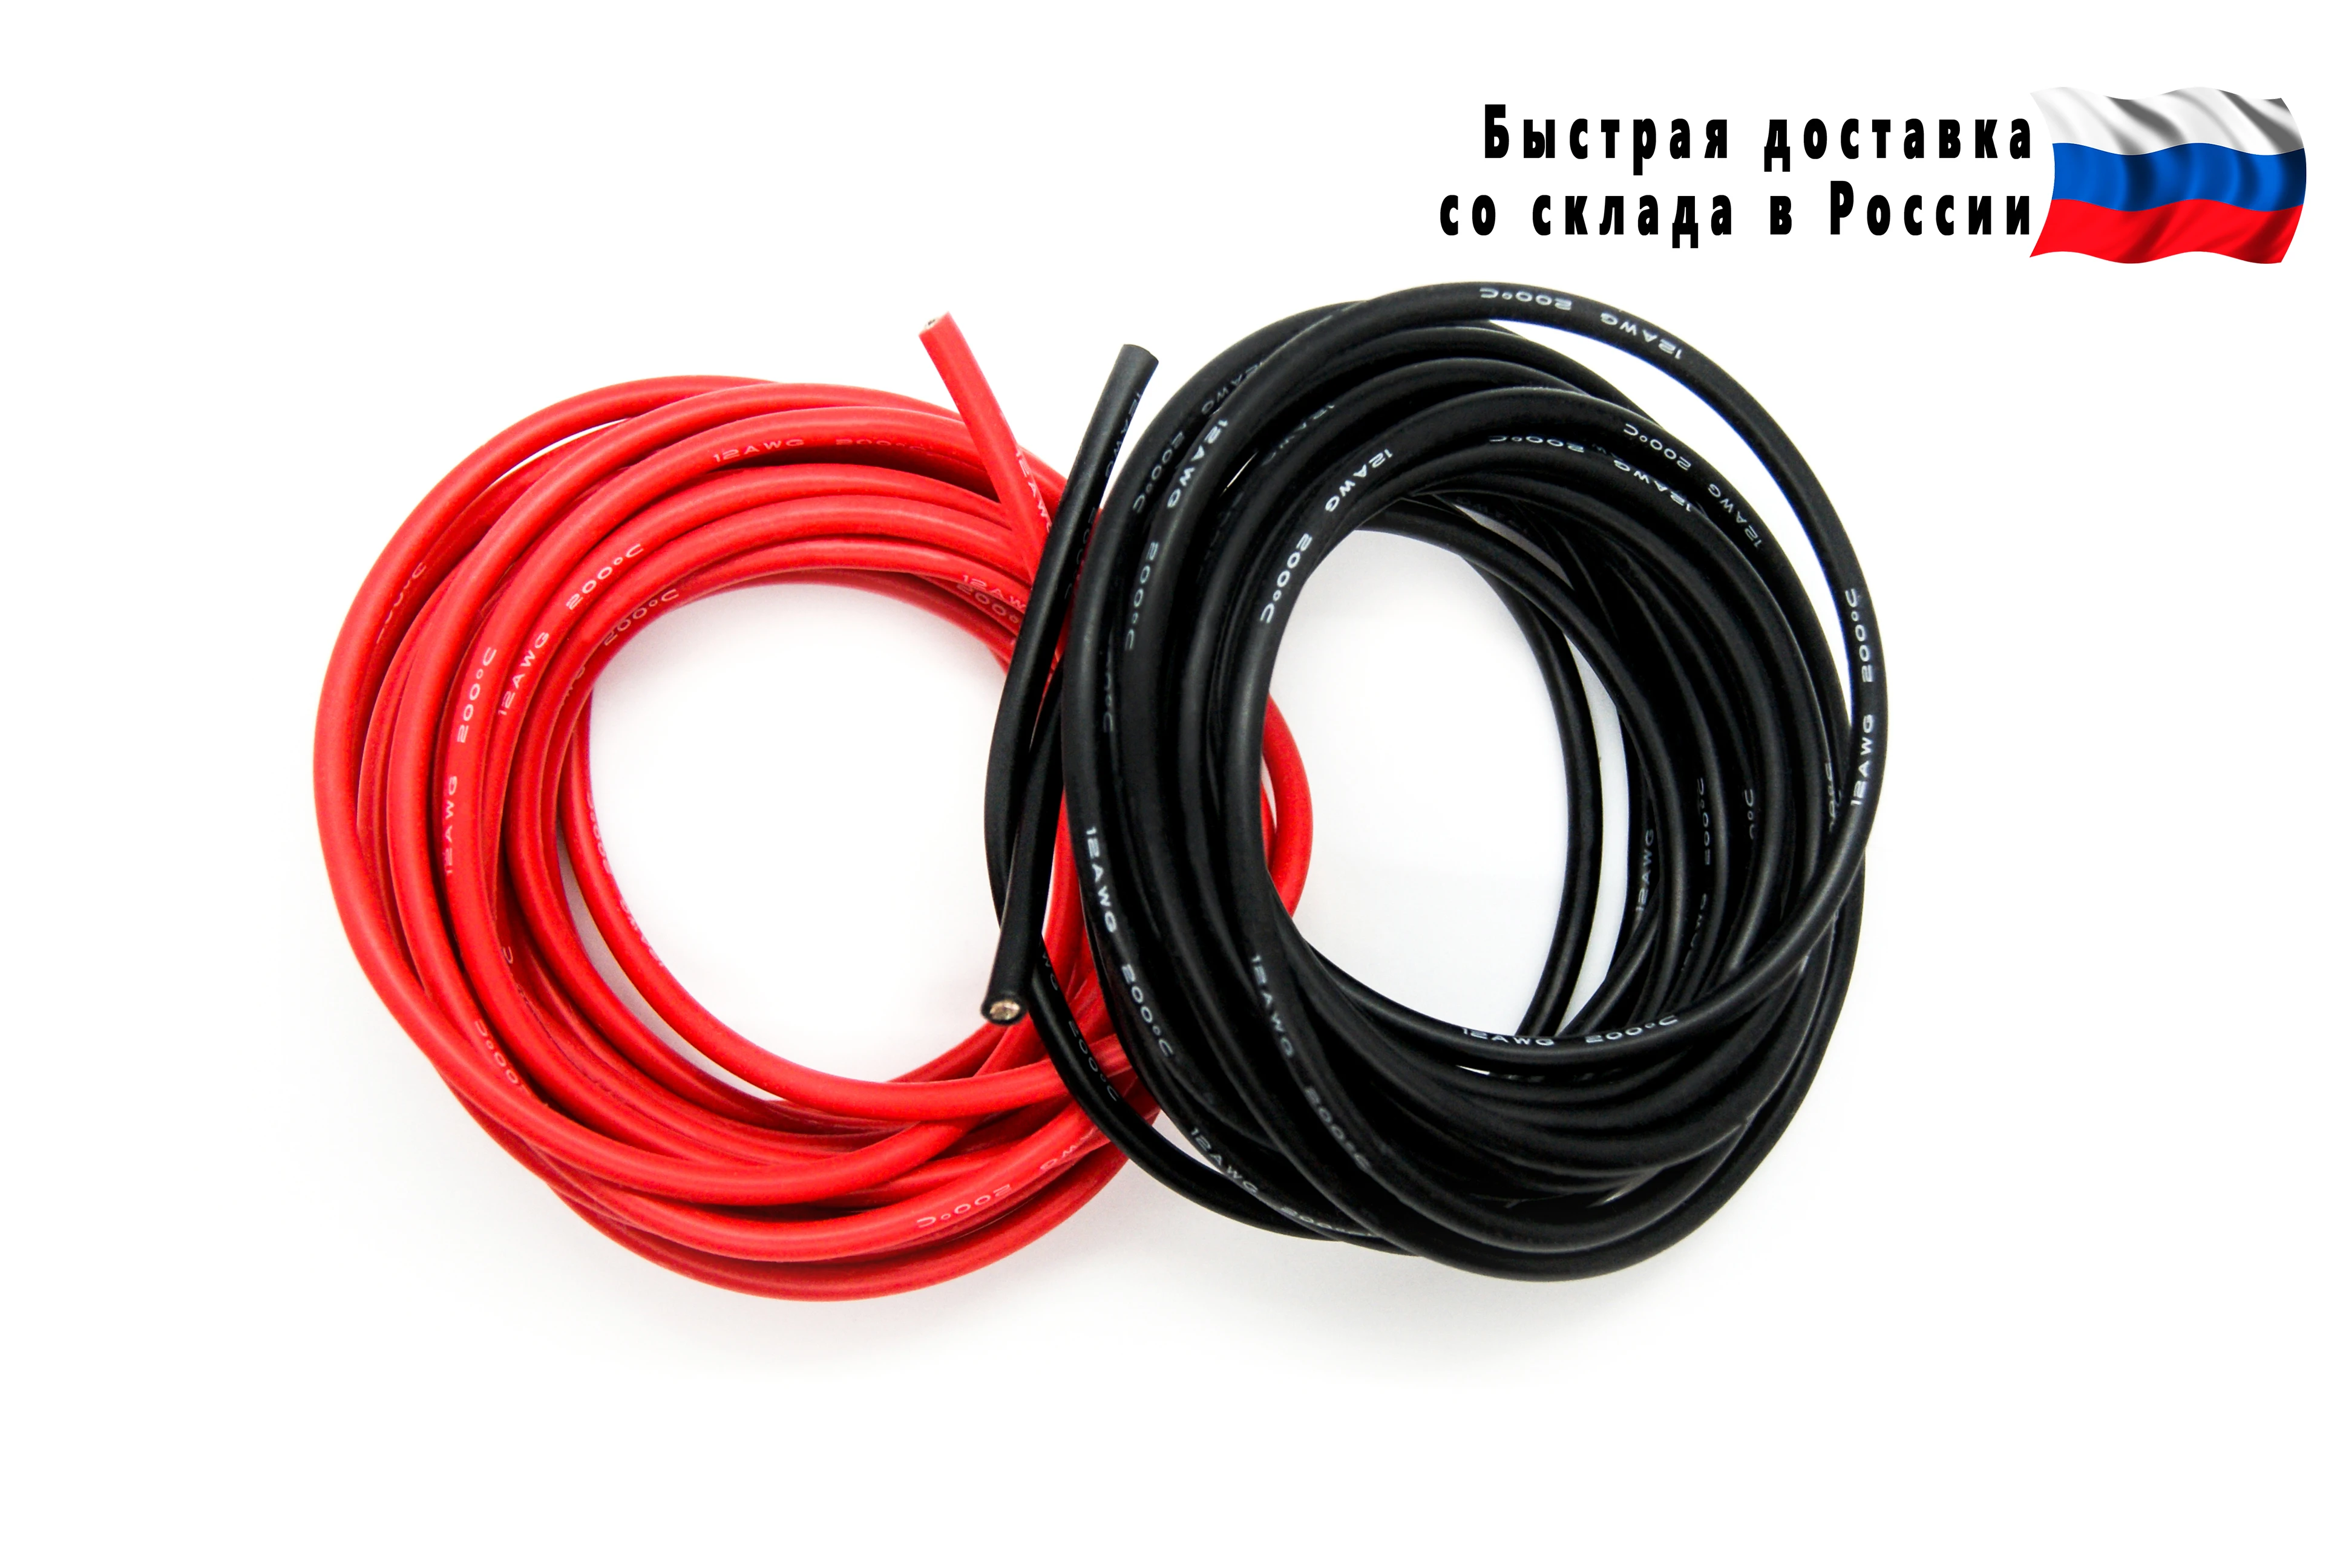 Silicone cable 10 AWG power red black |